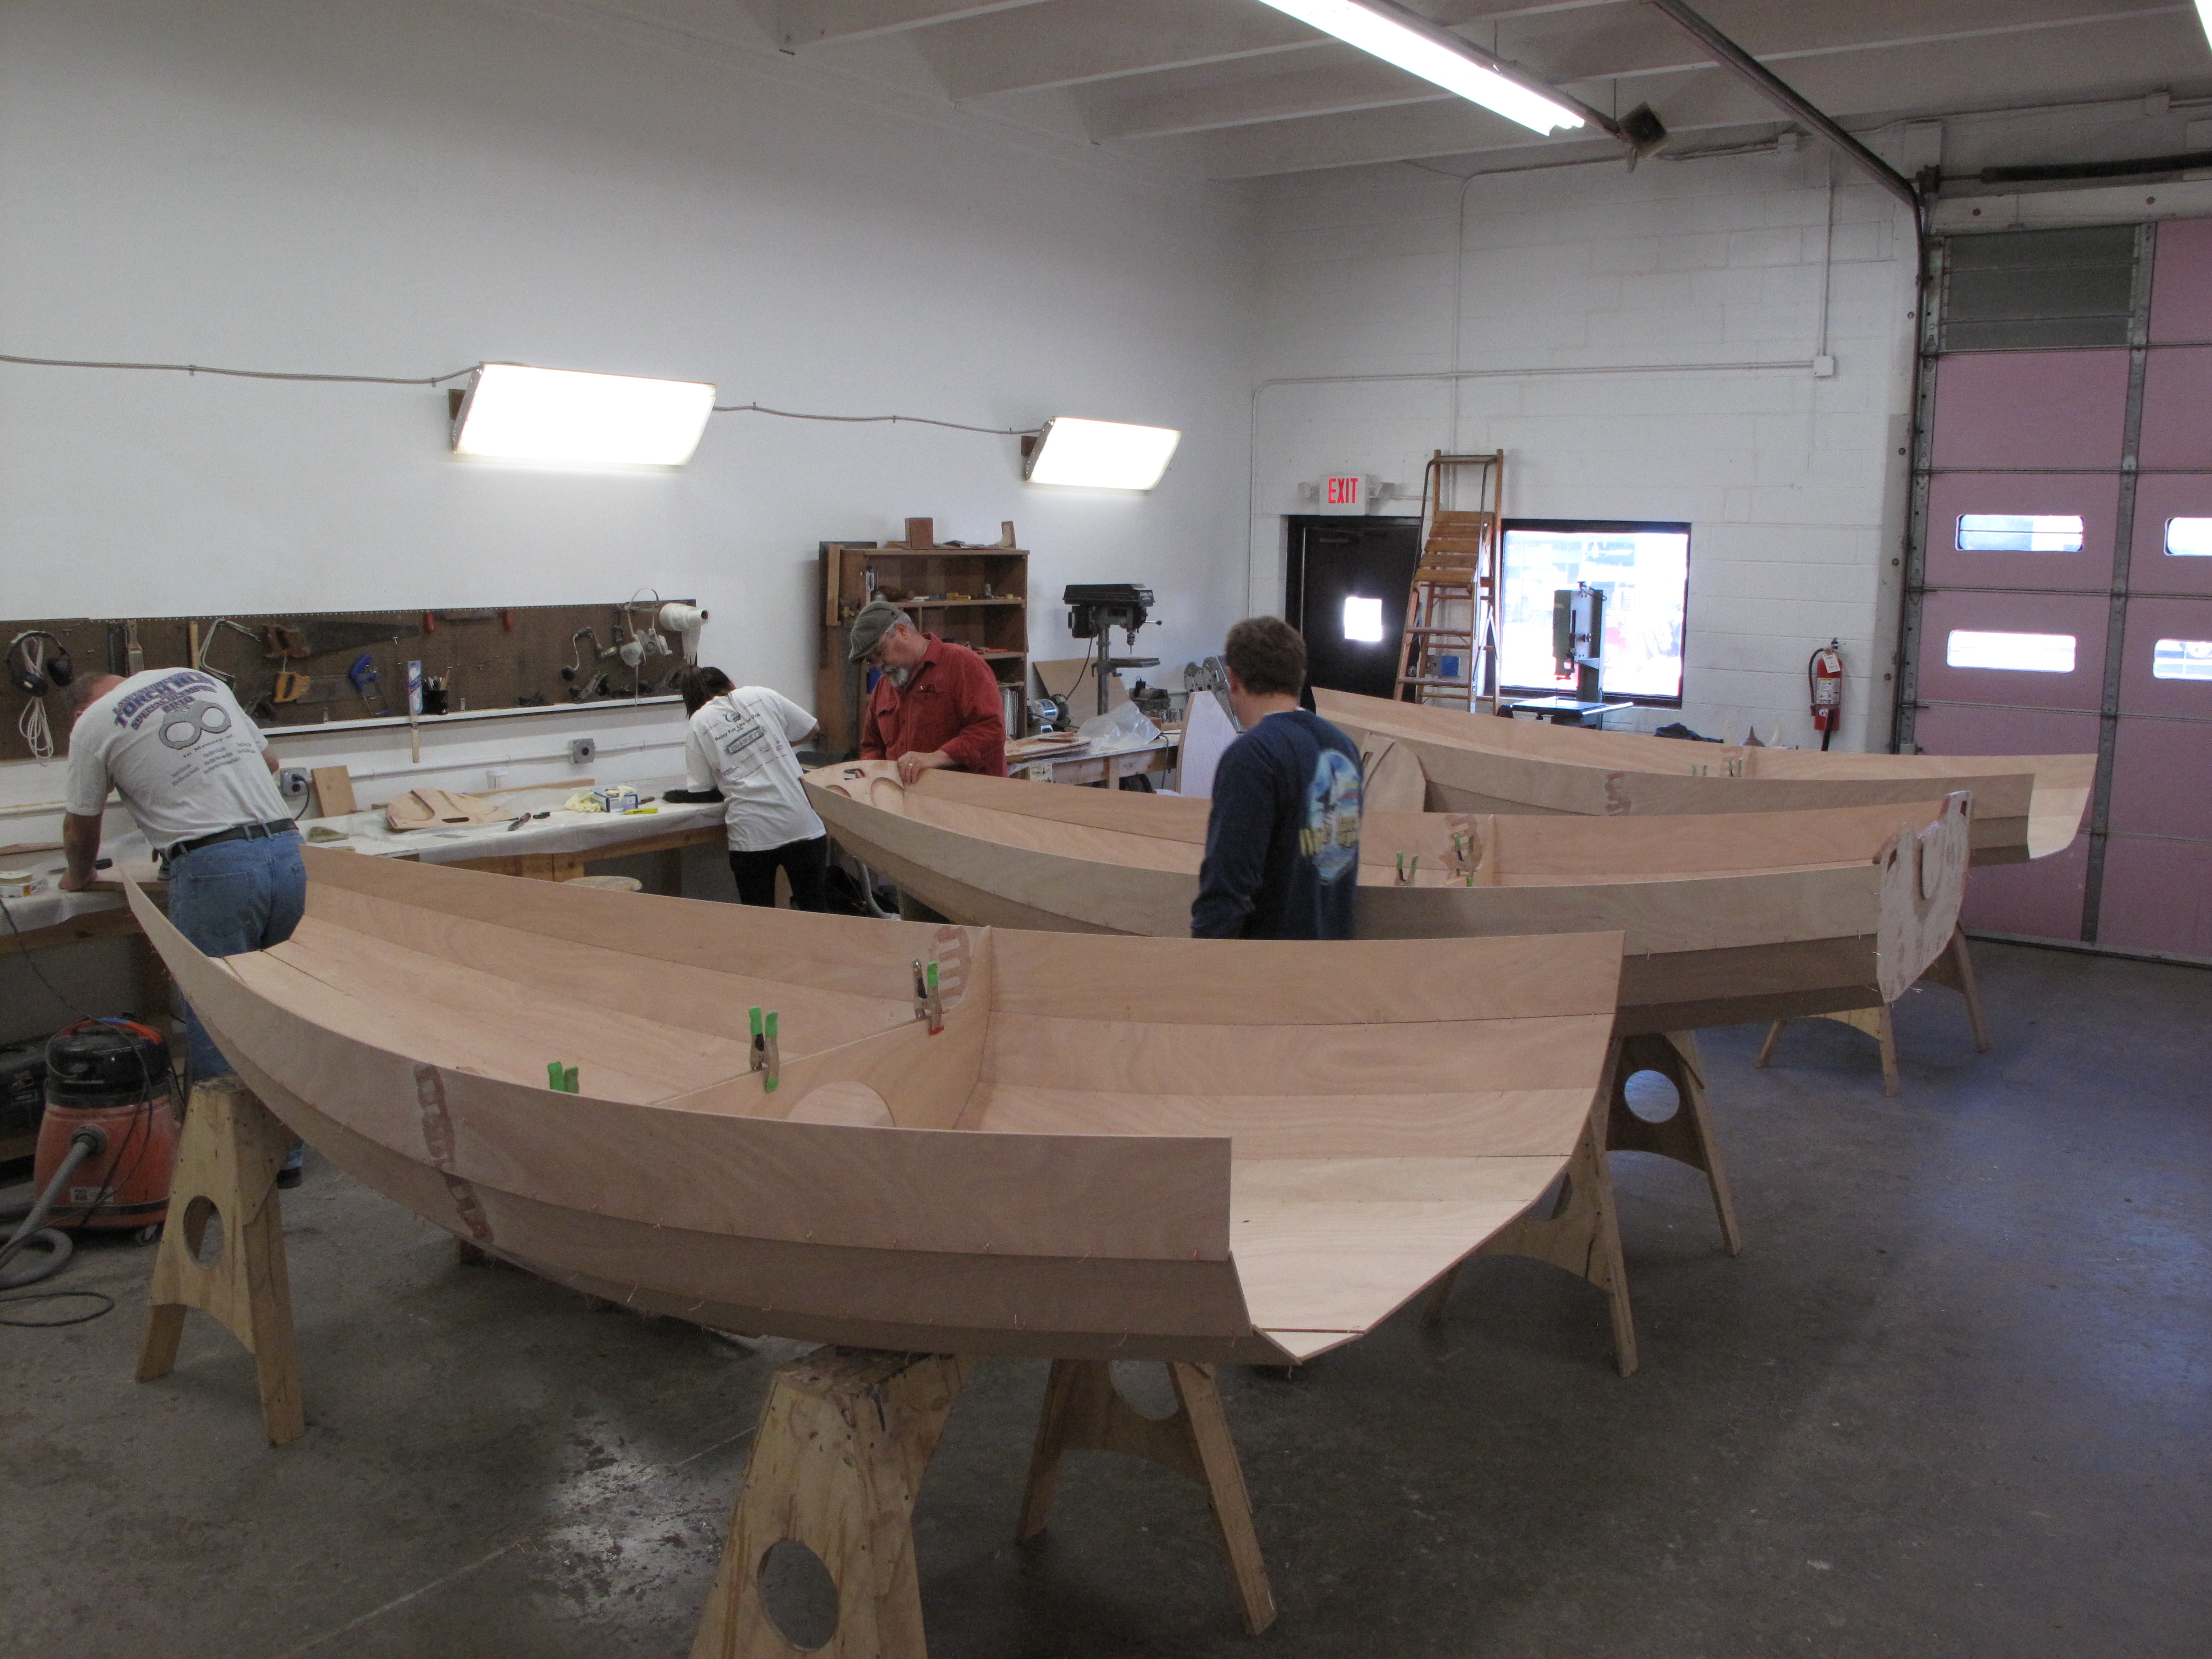 Passagemaker Dinghy Class - First Day!  Still awesome how fast these things shape up.  Never get tired of it.